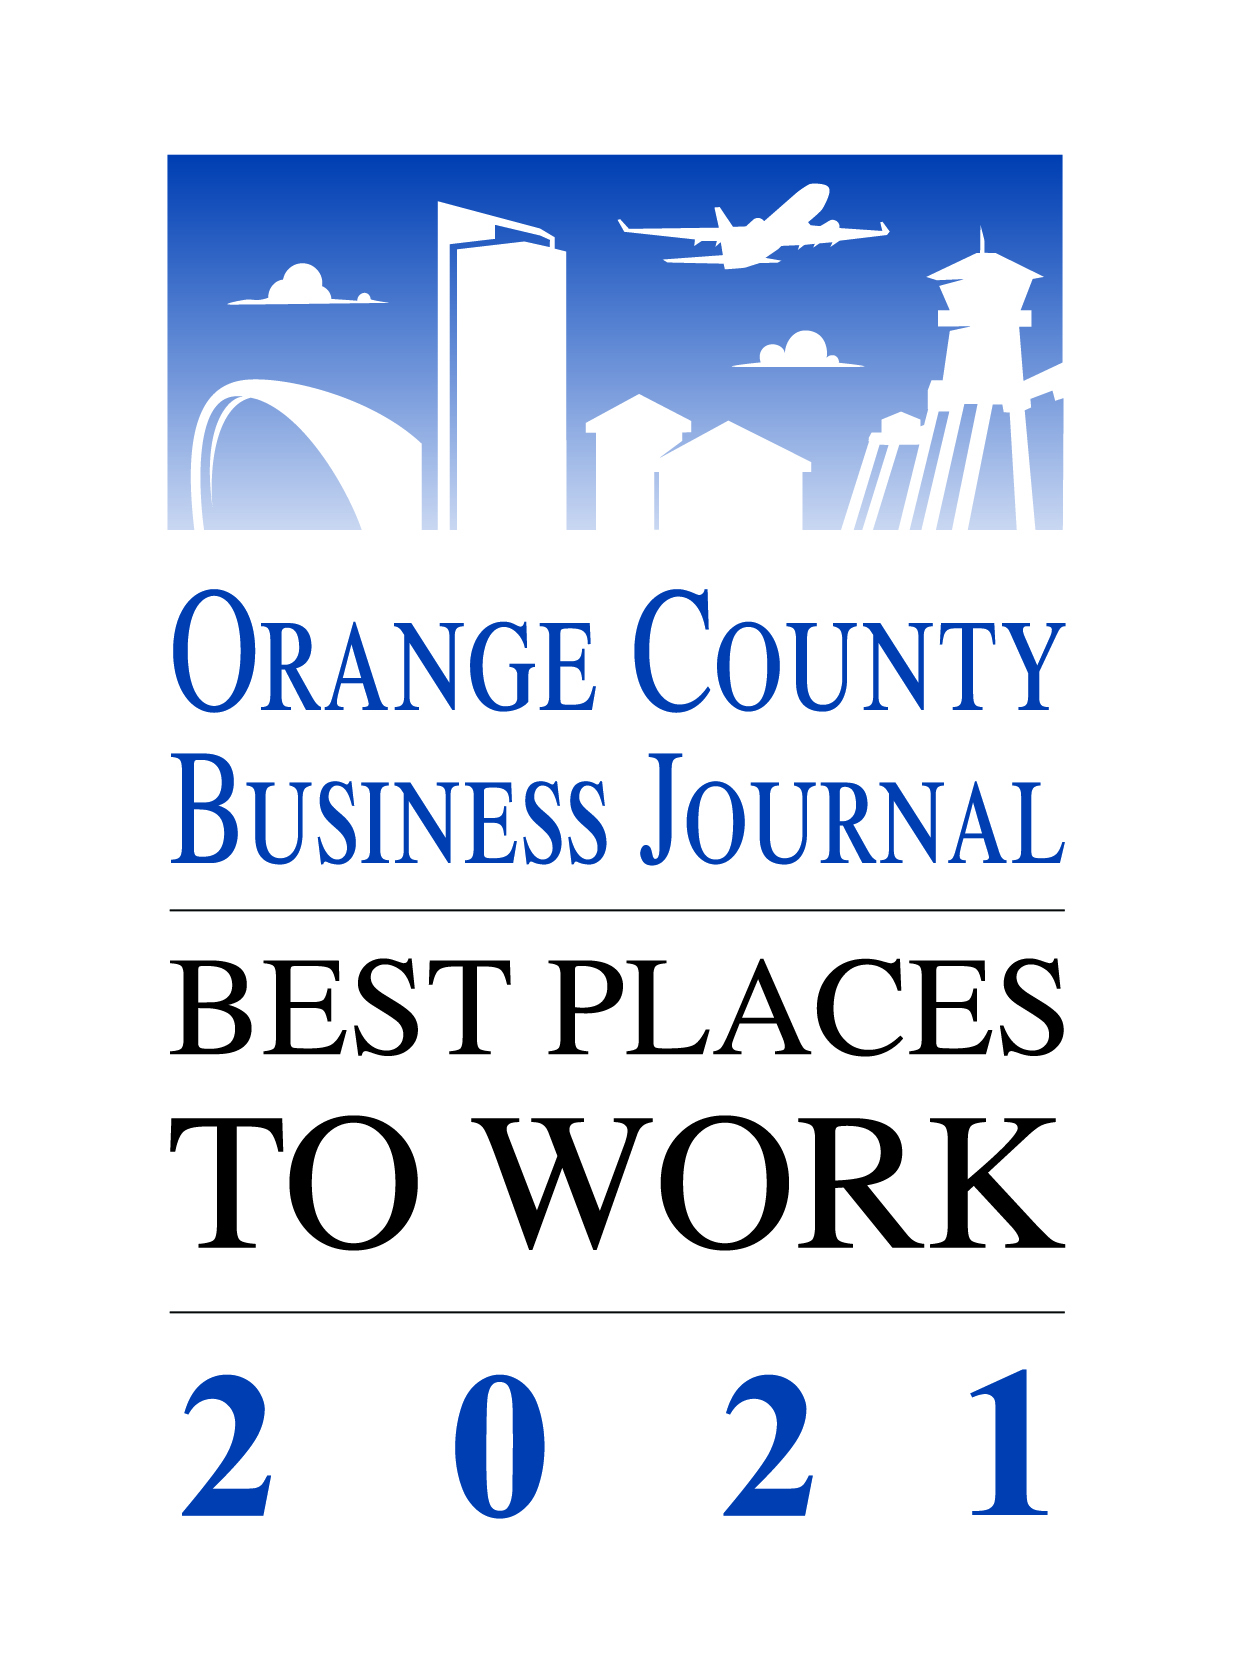 best place to work award logo 2021